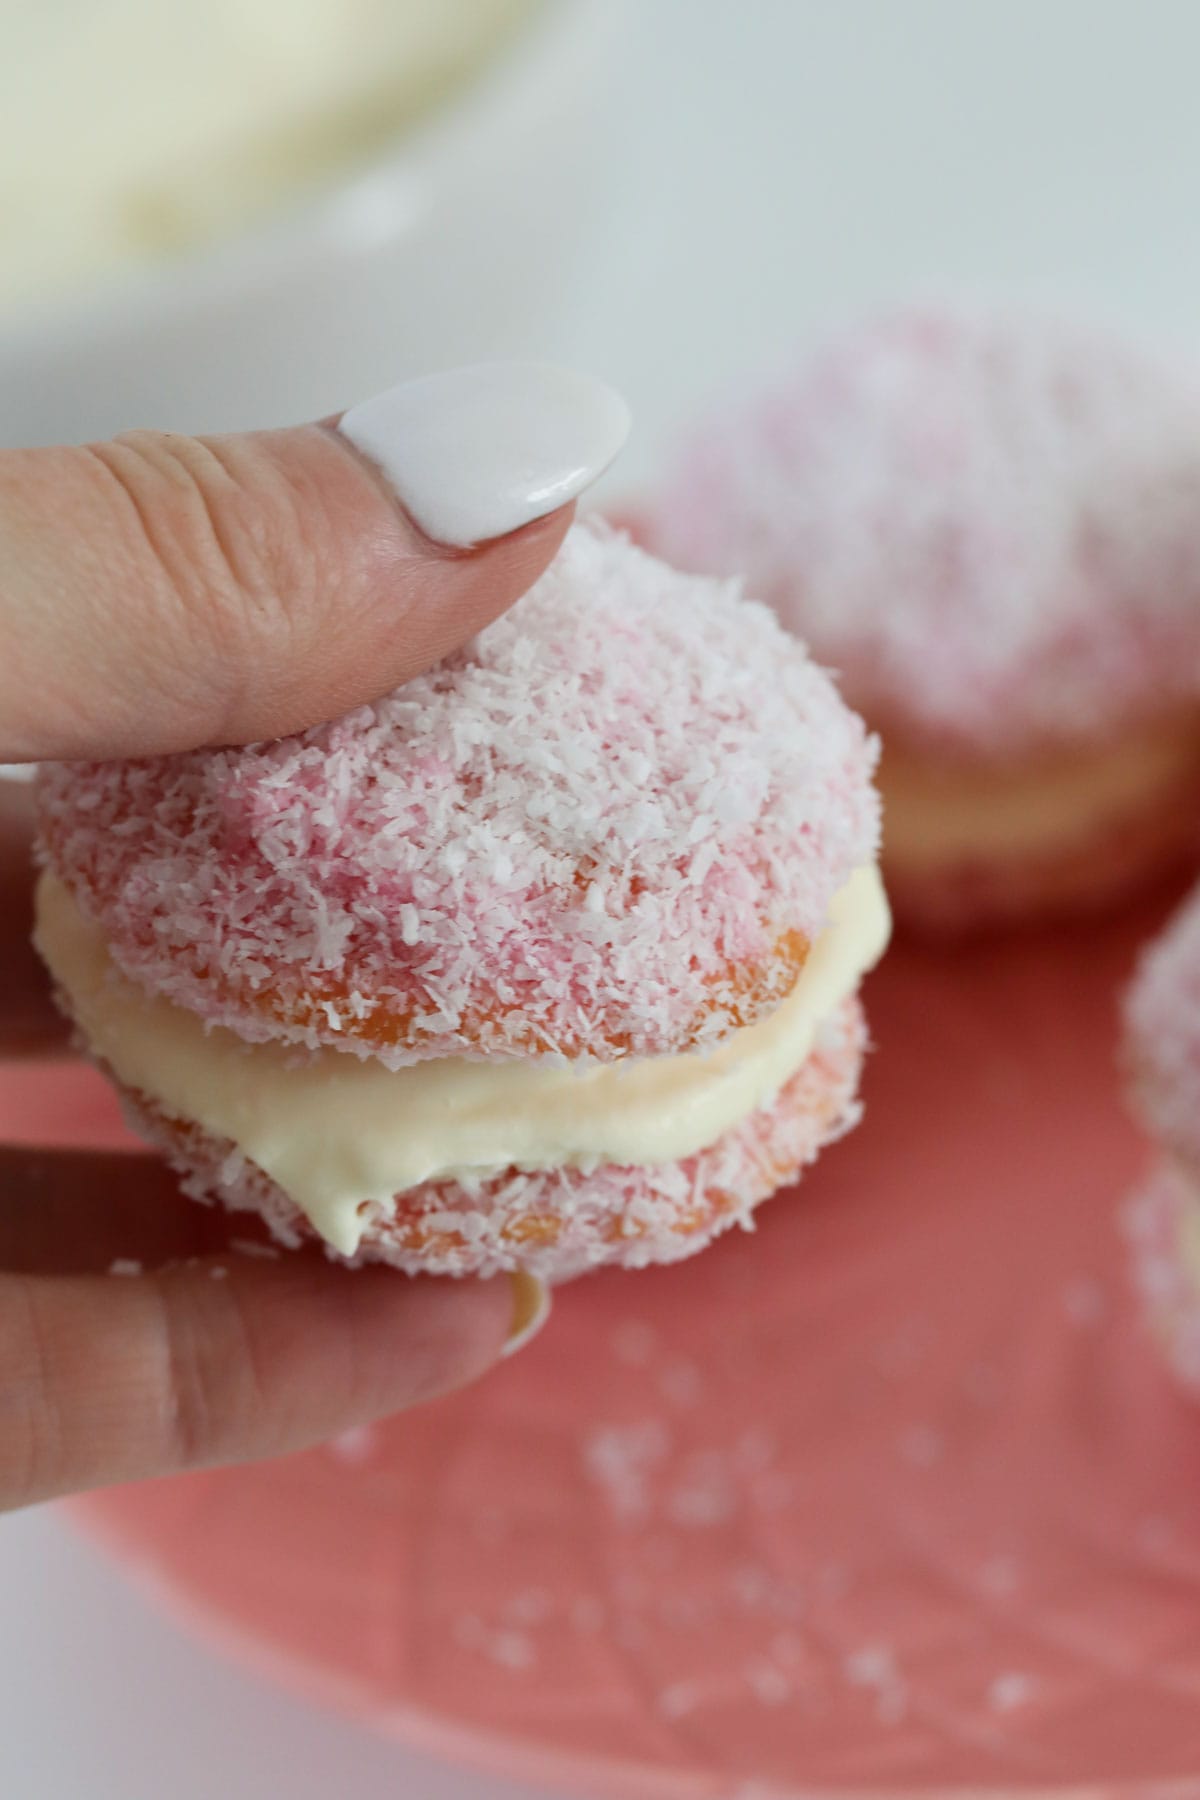 A hand holding a small pink sponge, coated in coconut and sandwiched together with cream.